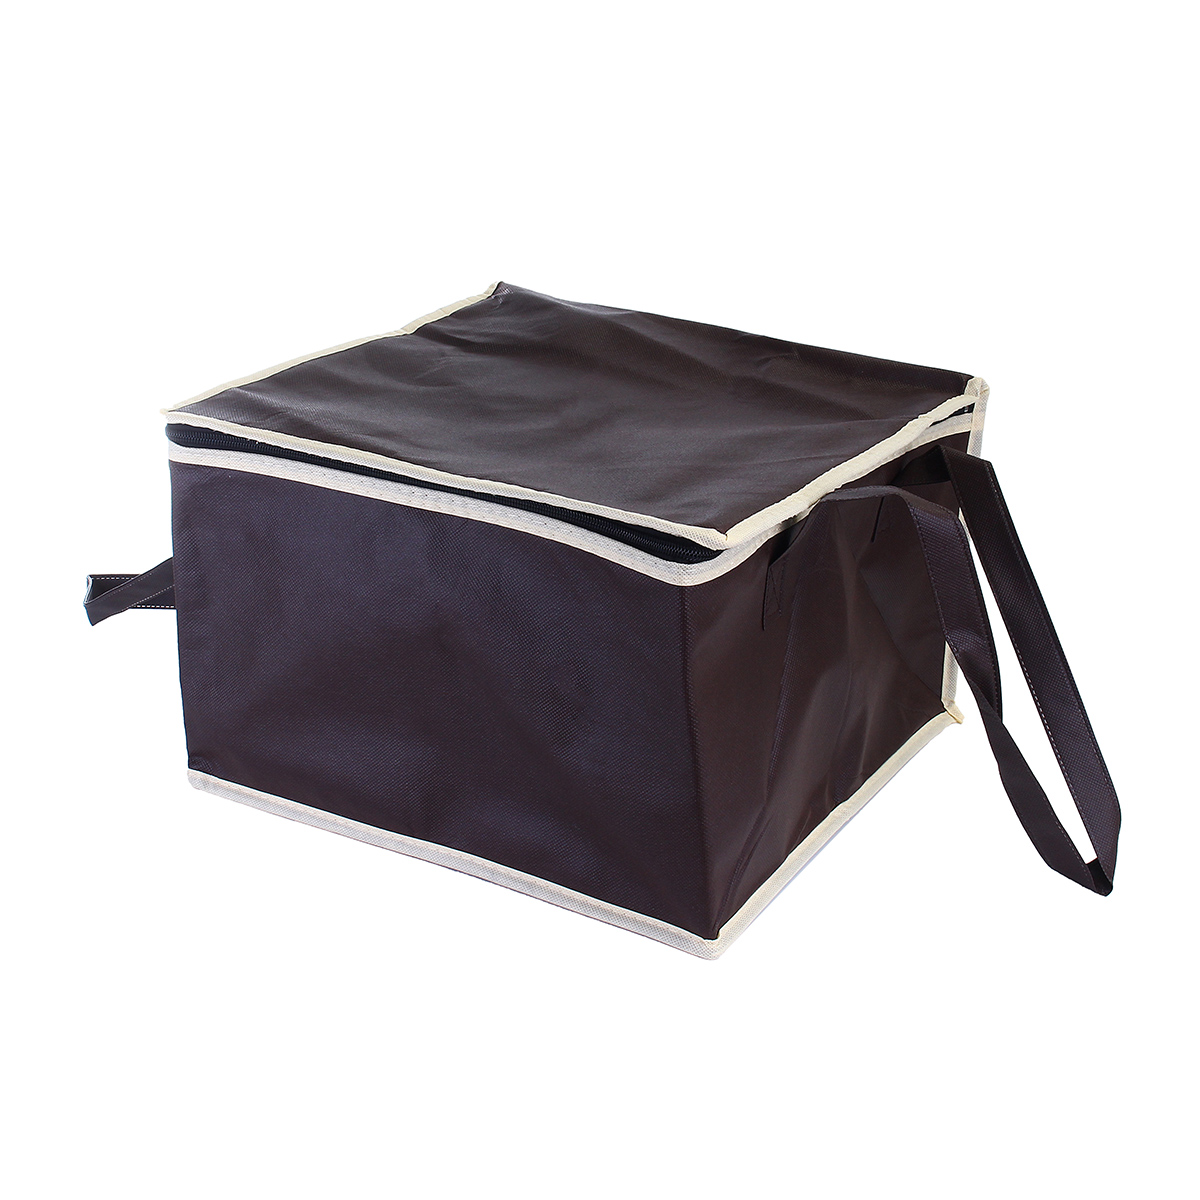 6-Inch-Non-woven-Fresh-keeping-Tote-Bag-with-Zipper-Cake-Picnic-Lunch-Bag-Reusable-Grocery-Bag-1353006-4